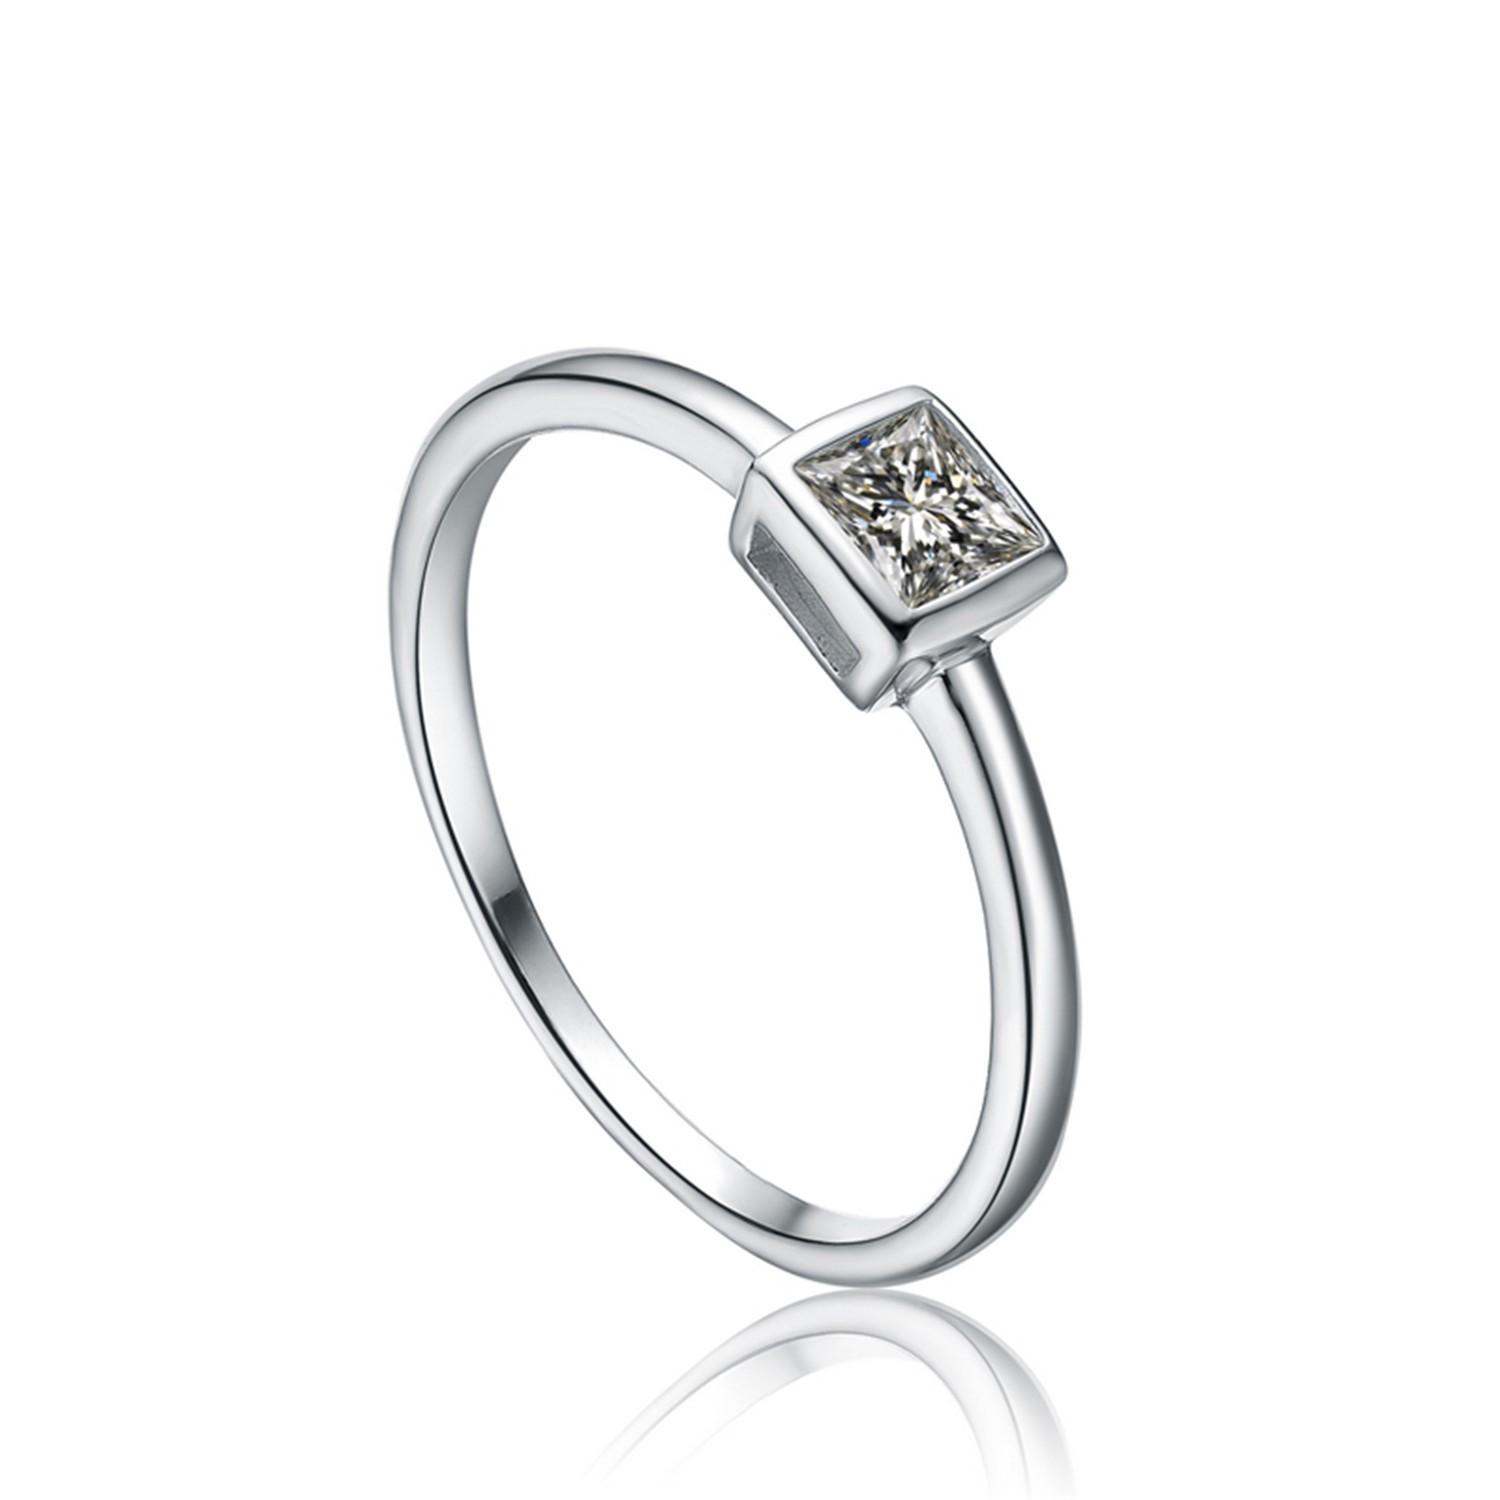 Light Simple Small Square Jewelry Female Cute Finger Rings Women Girls Ring White CZ 925 Silver 